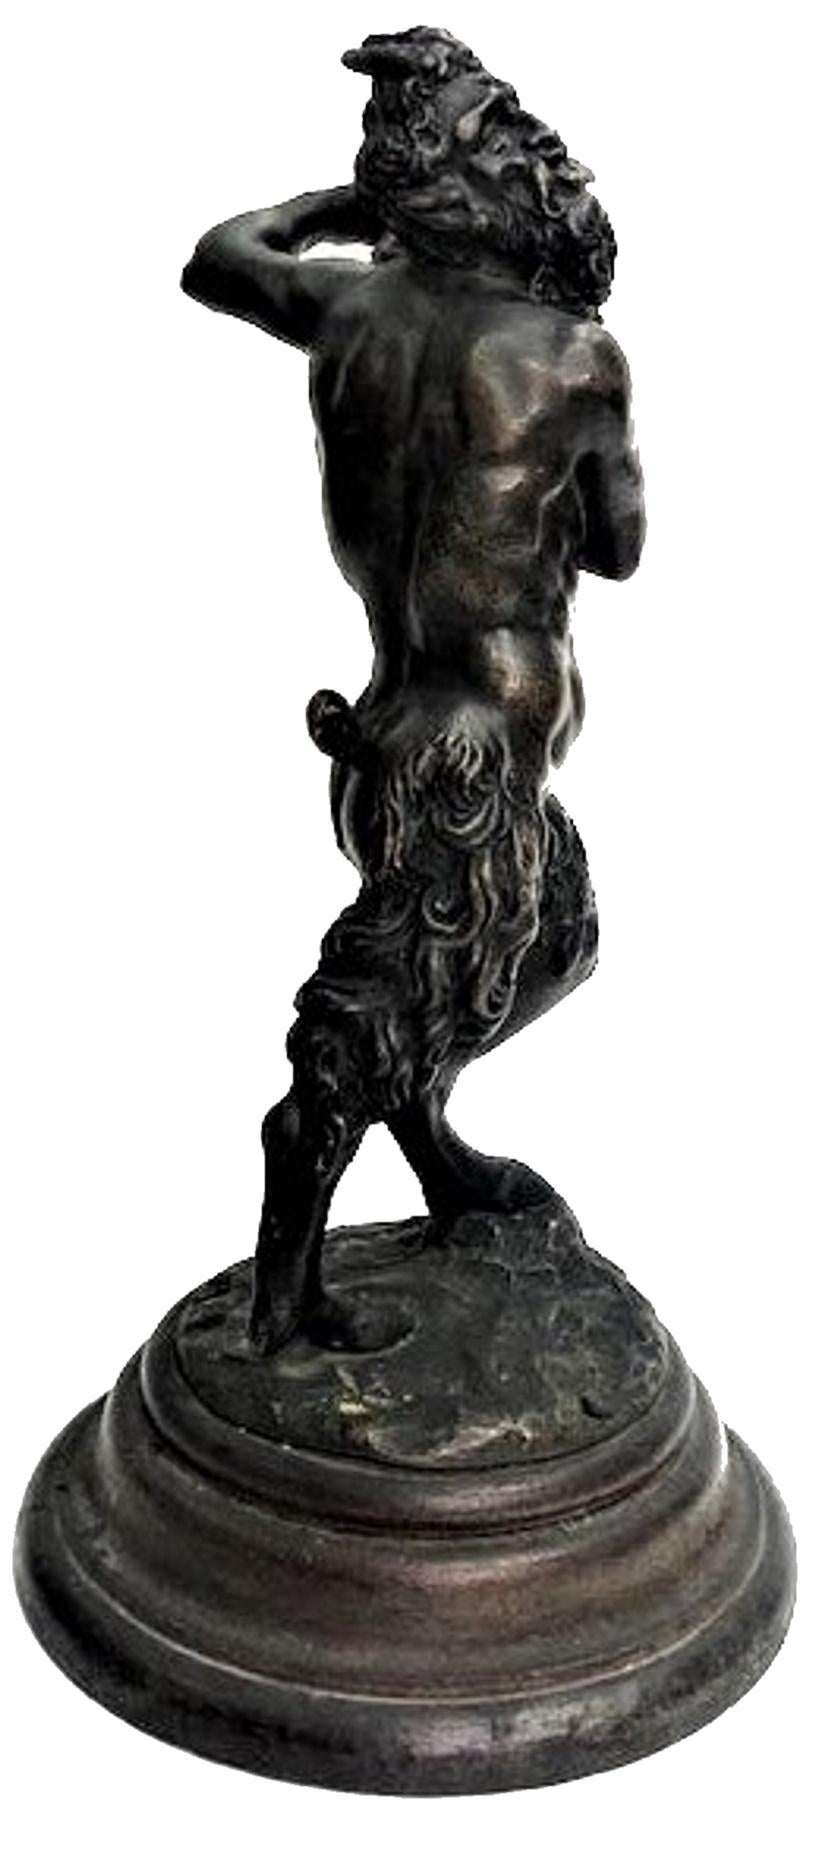 Probably Italian, 19th Century patinated bronze candlestick in form of a dancing Fawn holding a candle-vessel in his hands, on its original wood base.